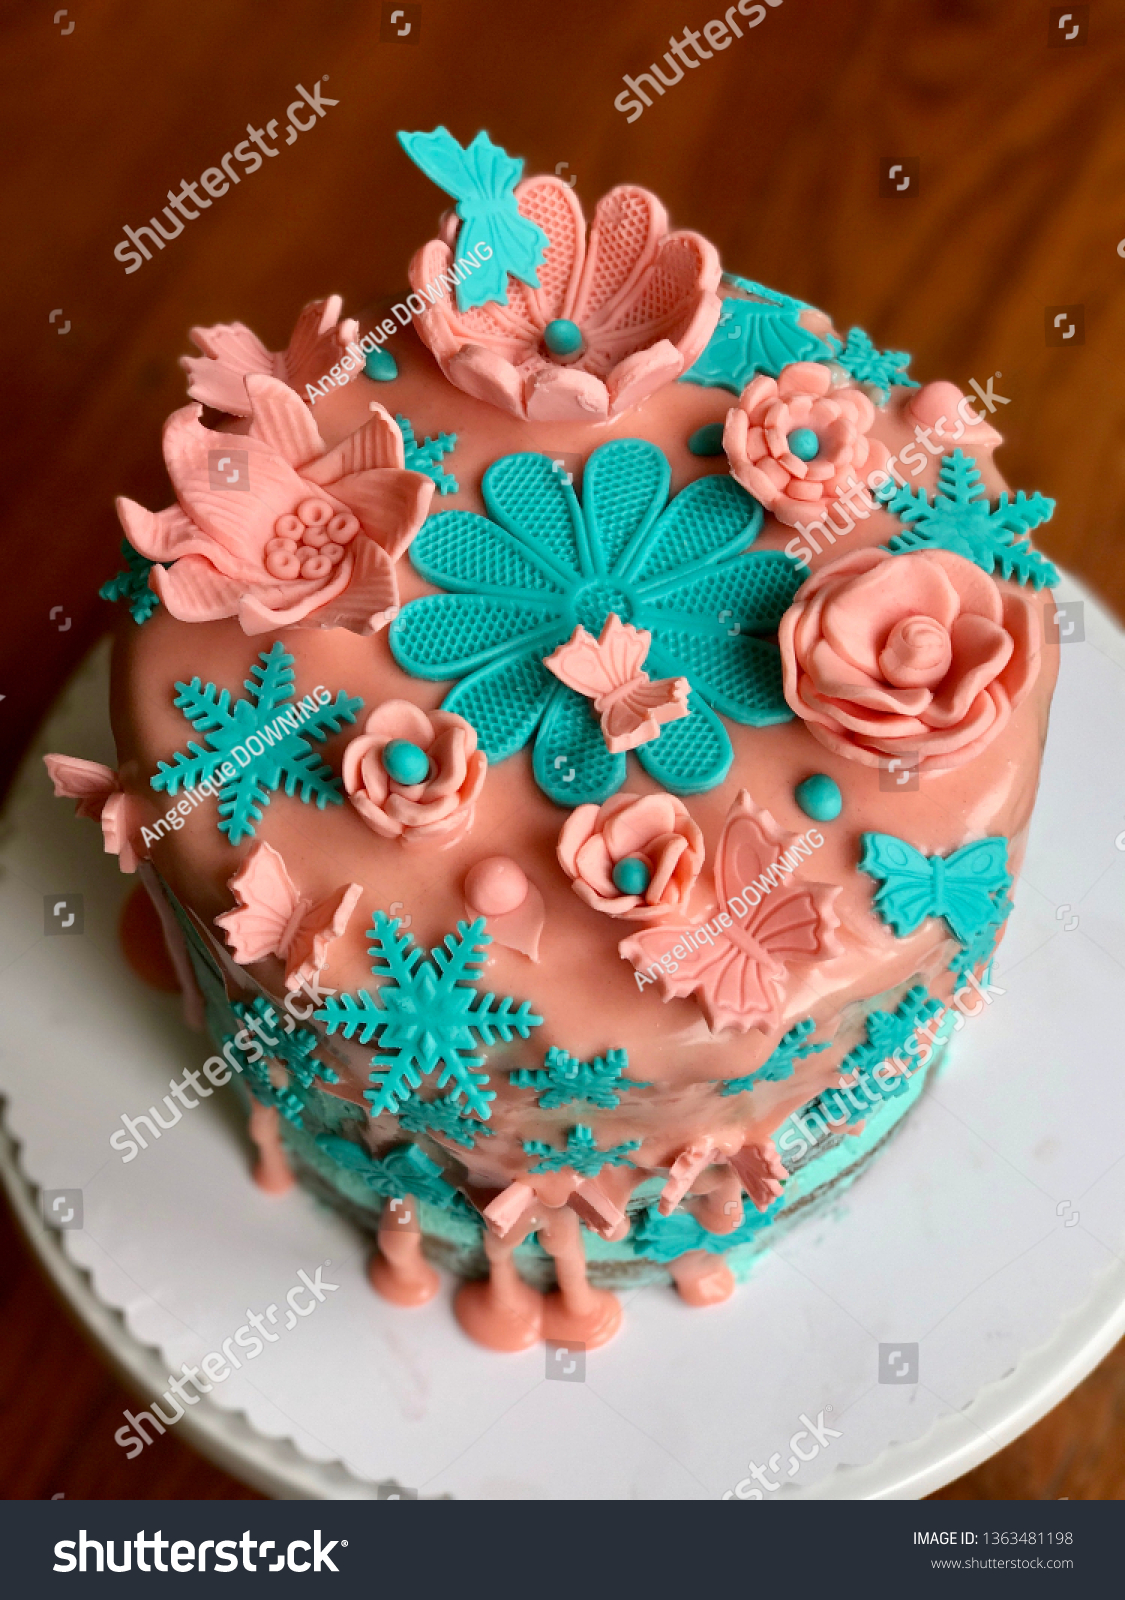 Download Layered Birthday Cake Butterflies Flowers Stock Photo Edit Now 1363481198